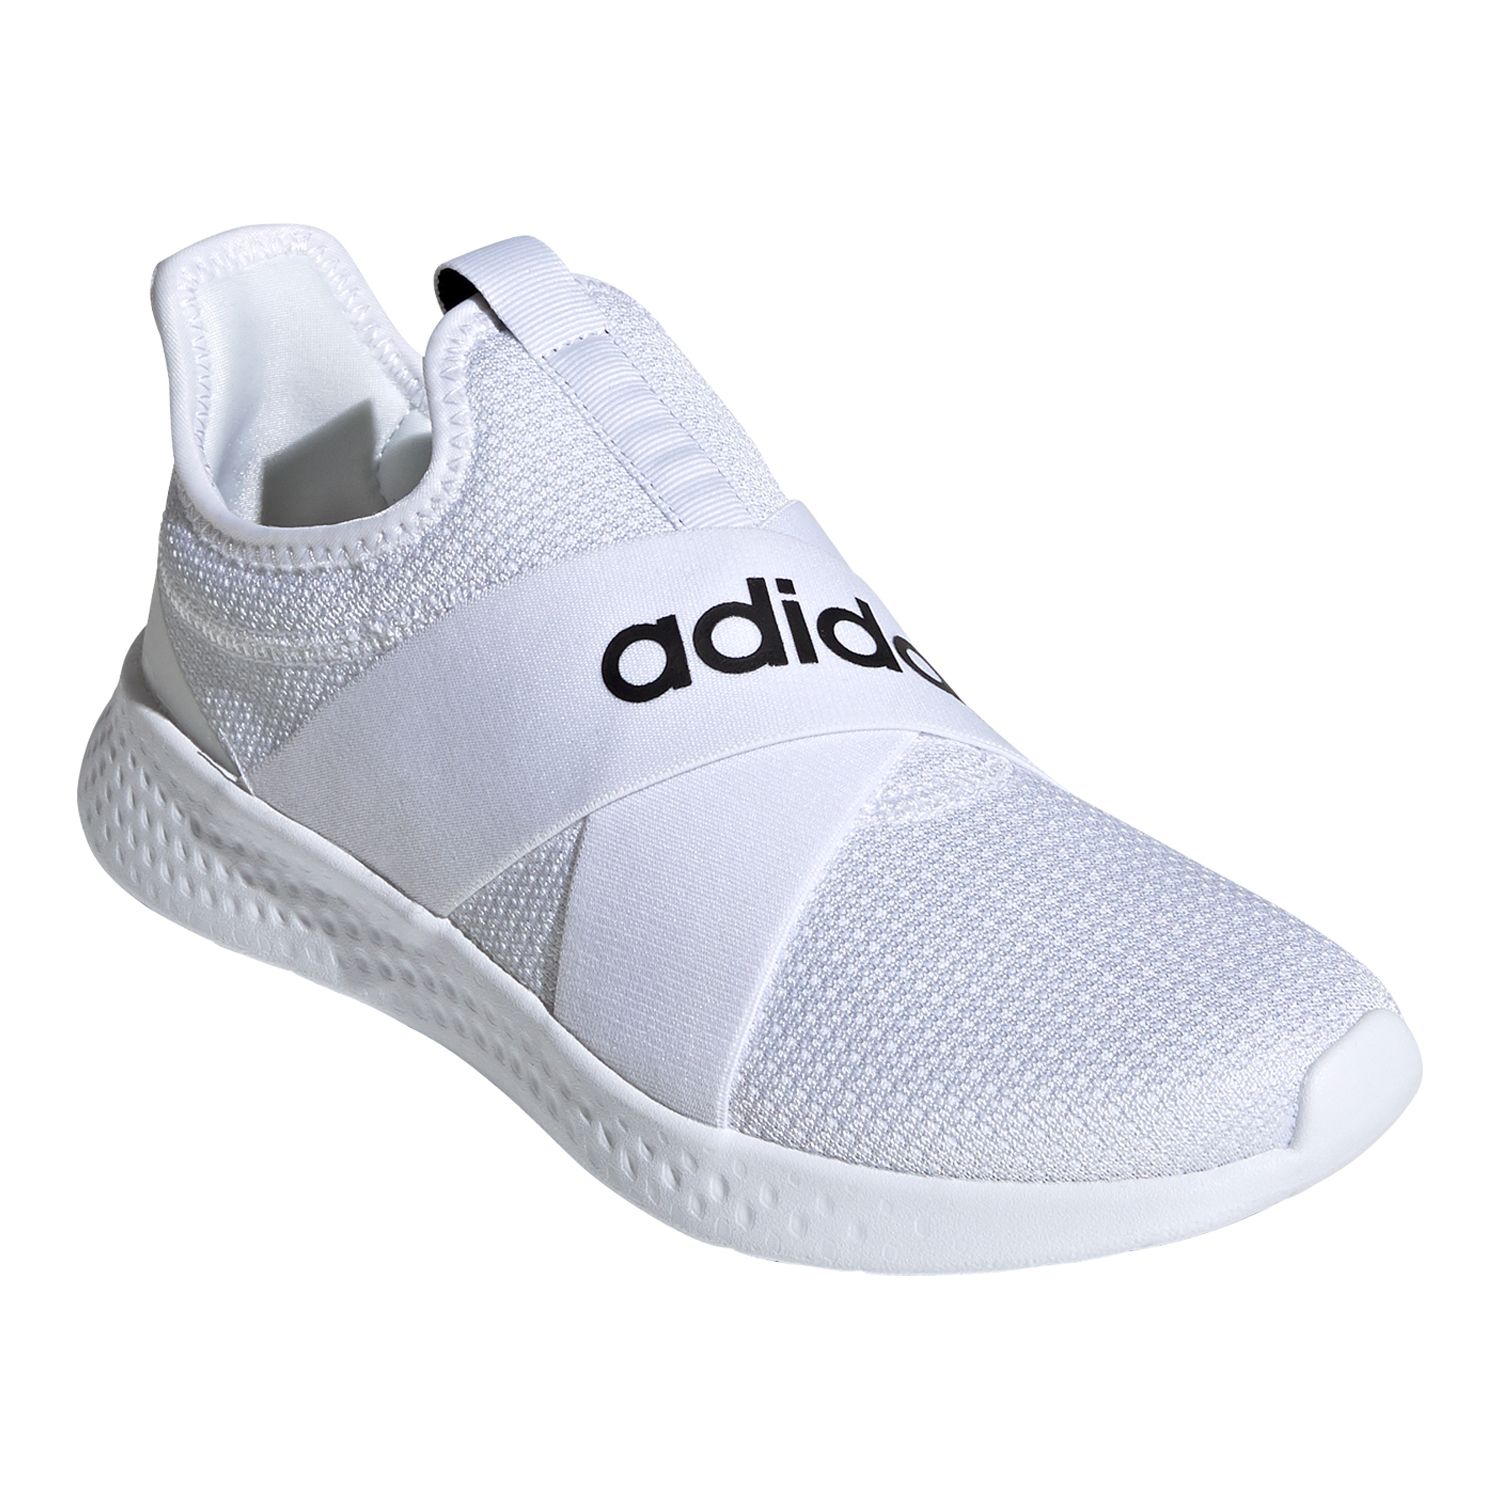 adidas shoes in kohls